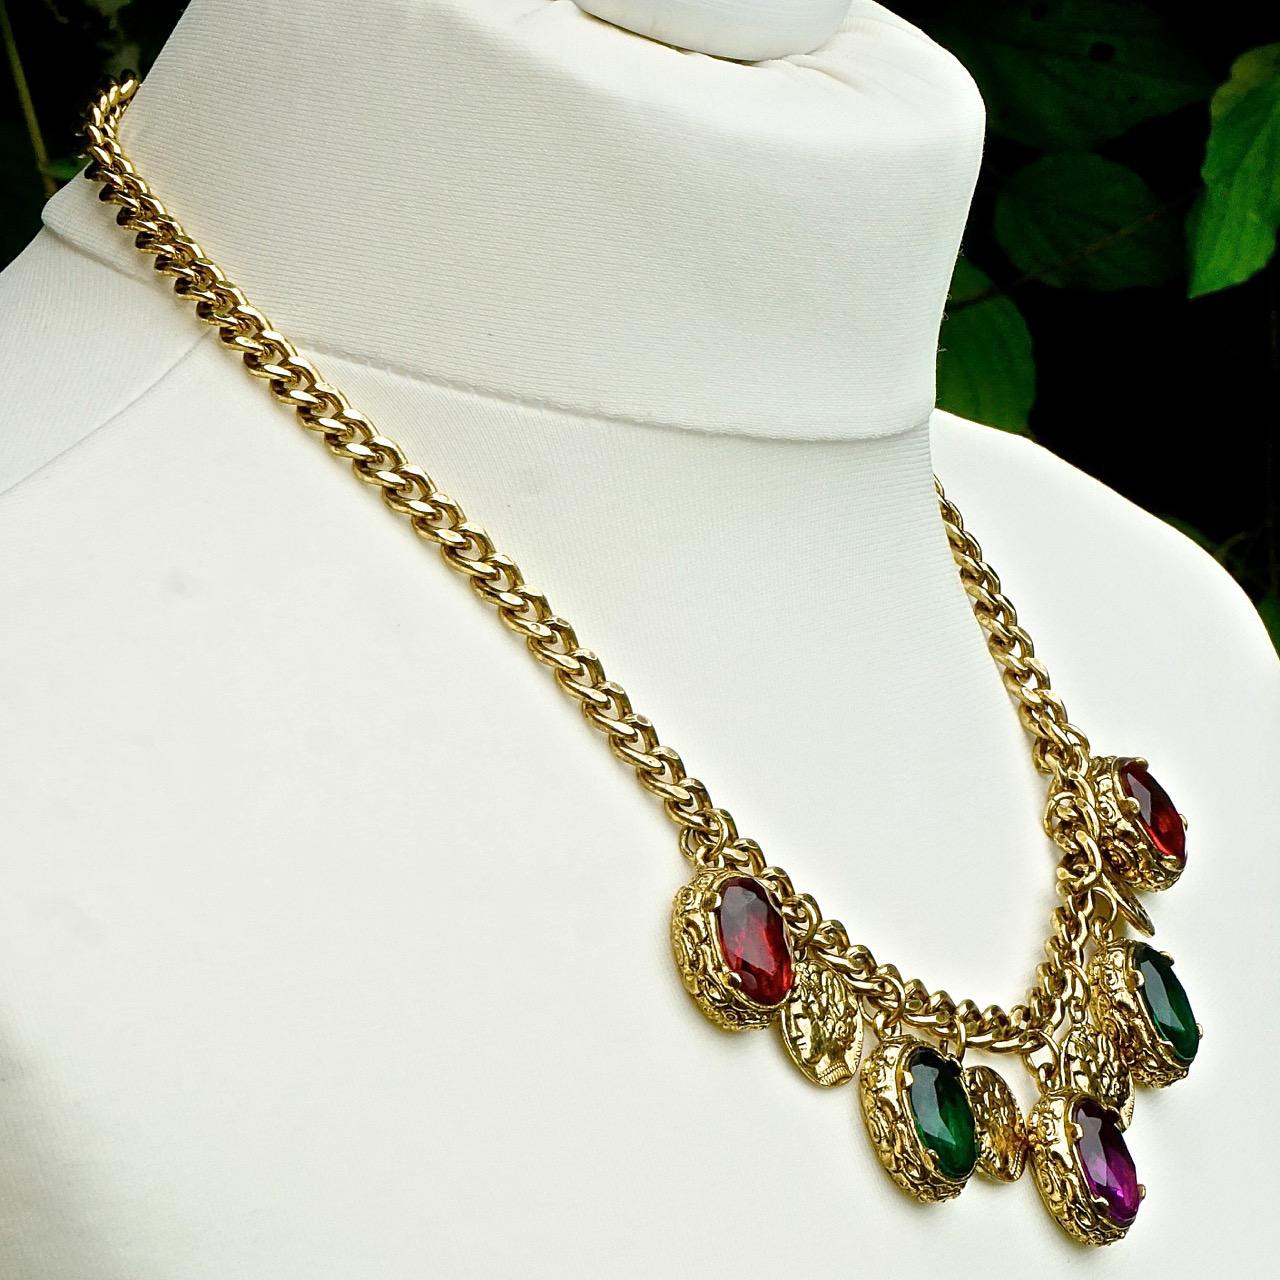 Gold Plated Curb Chain Necklace with Glass Jewel and Coin Drops, circa 1980s For Sale 4